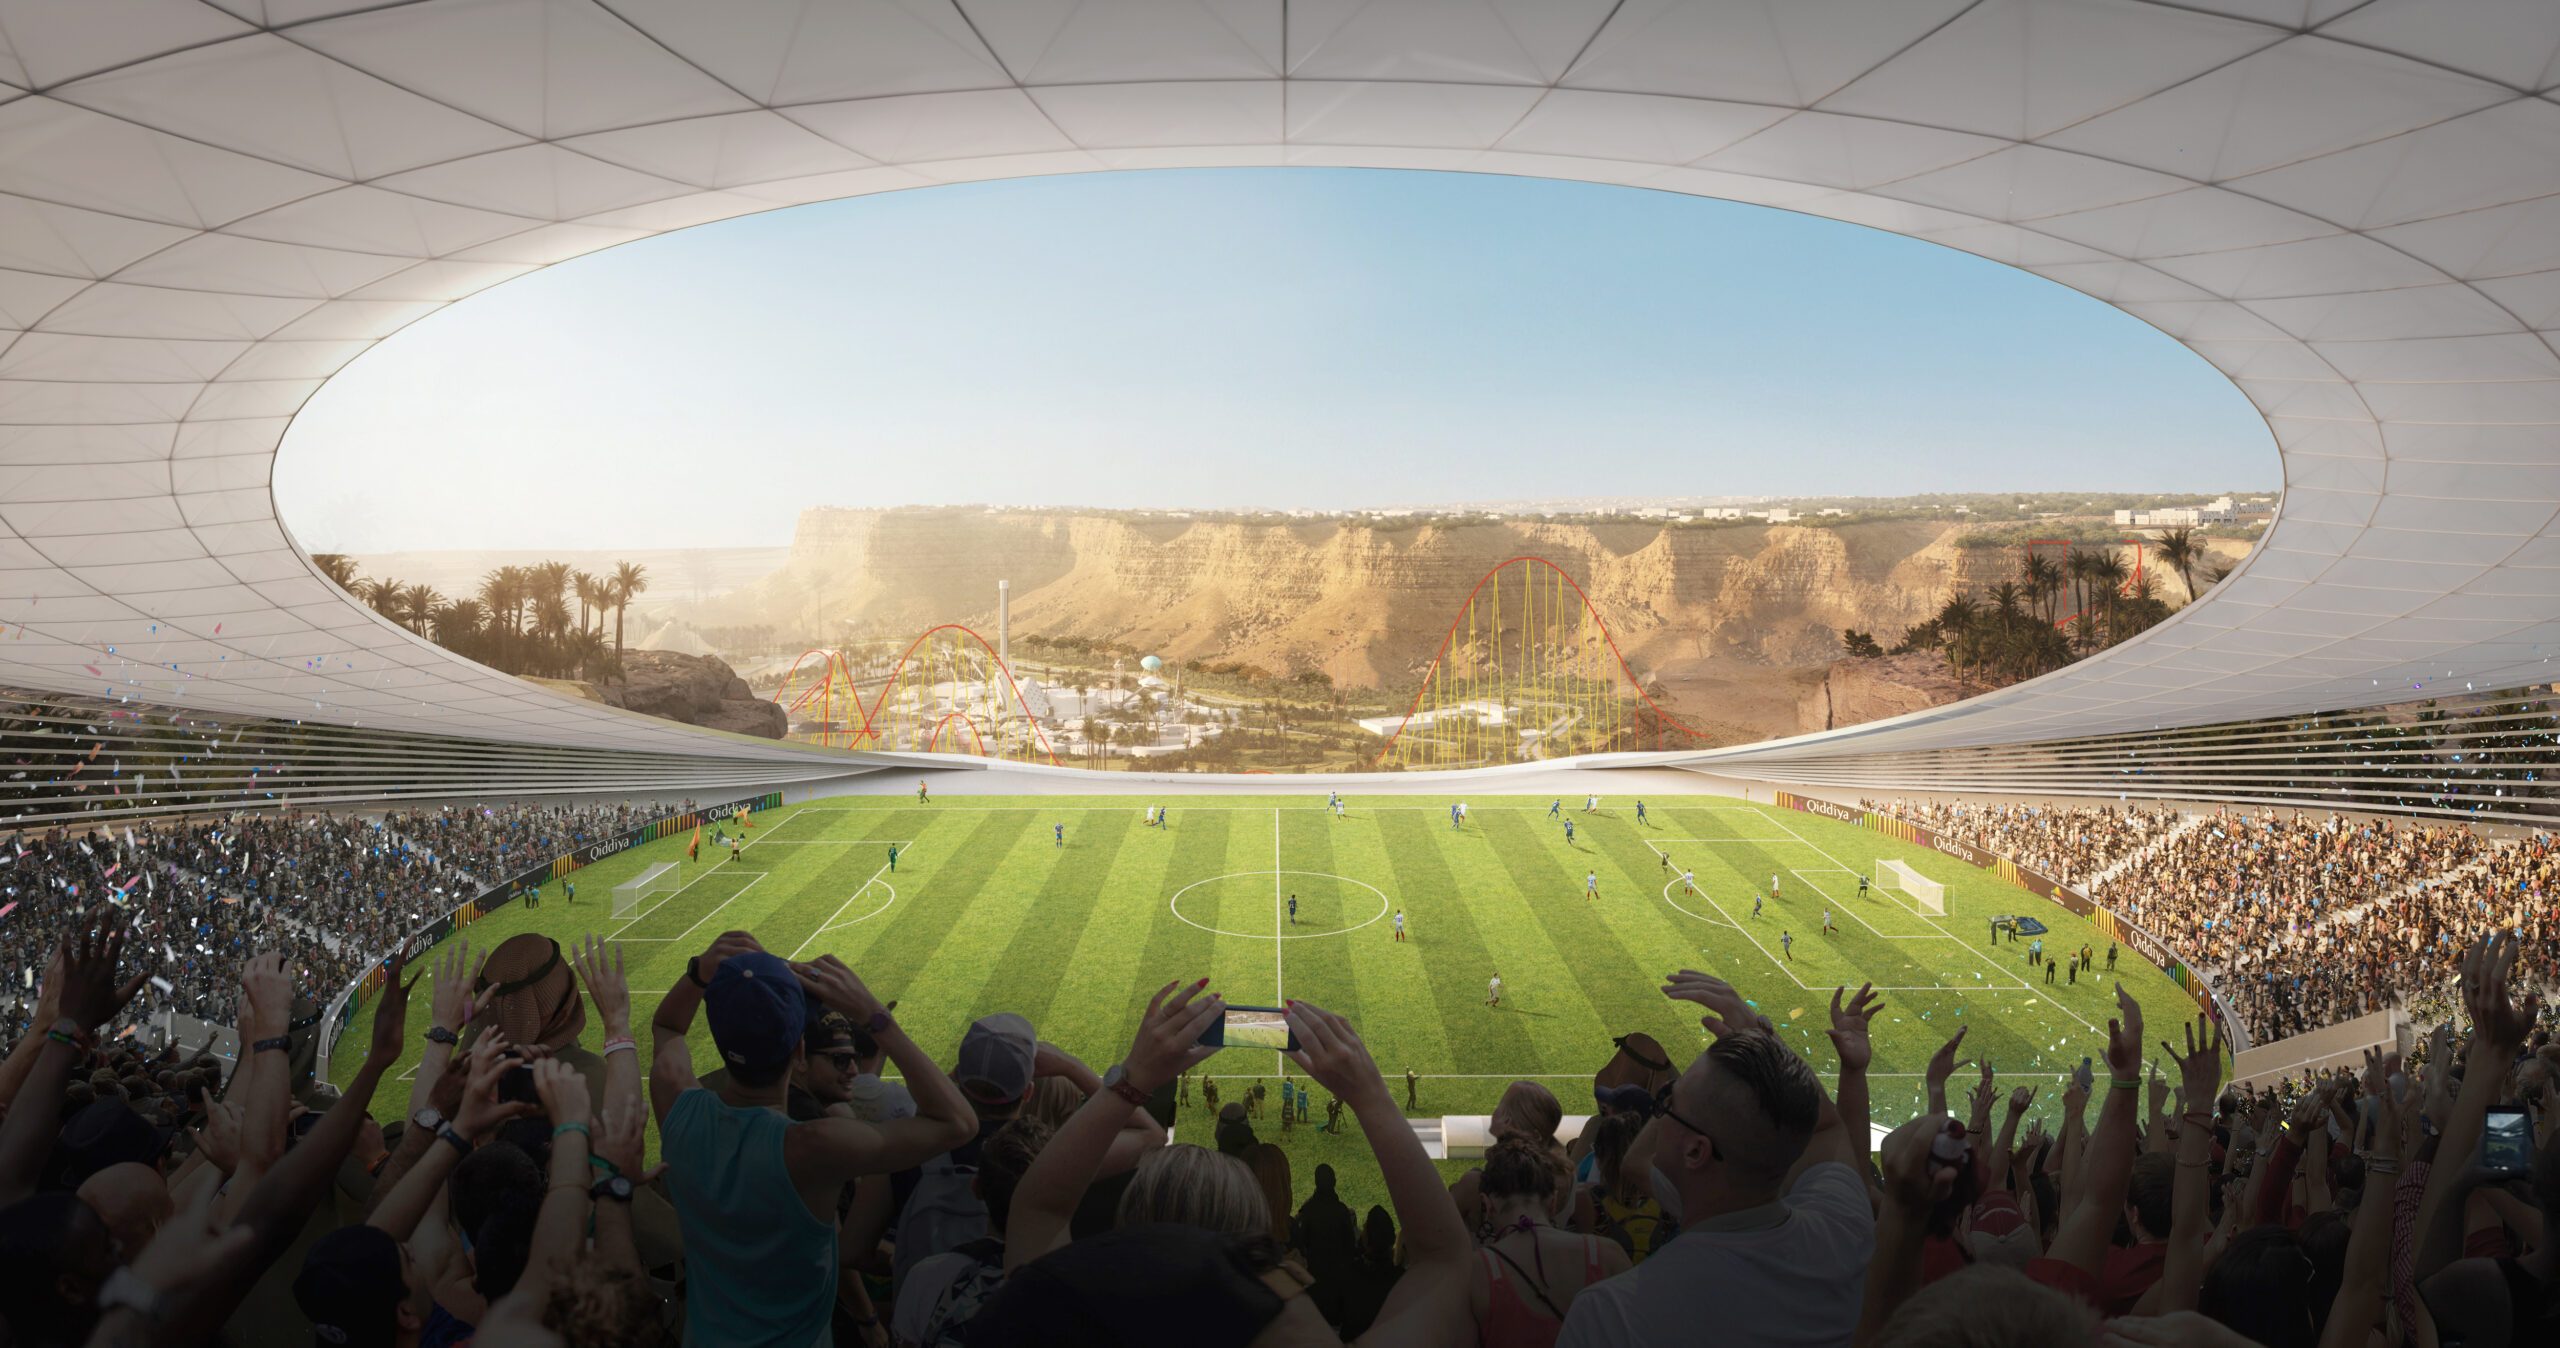 Artist's impression of the planned cliff-top football stadium in Qiddiya, Saudi Arabia's entertainment and sports complex south-west of Riyadh